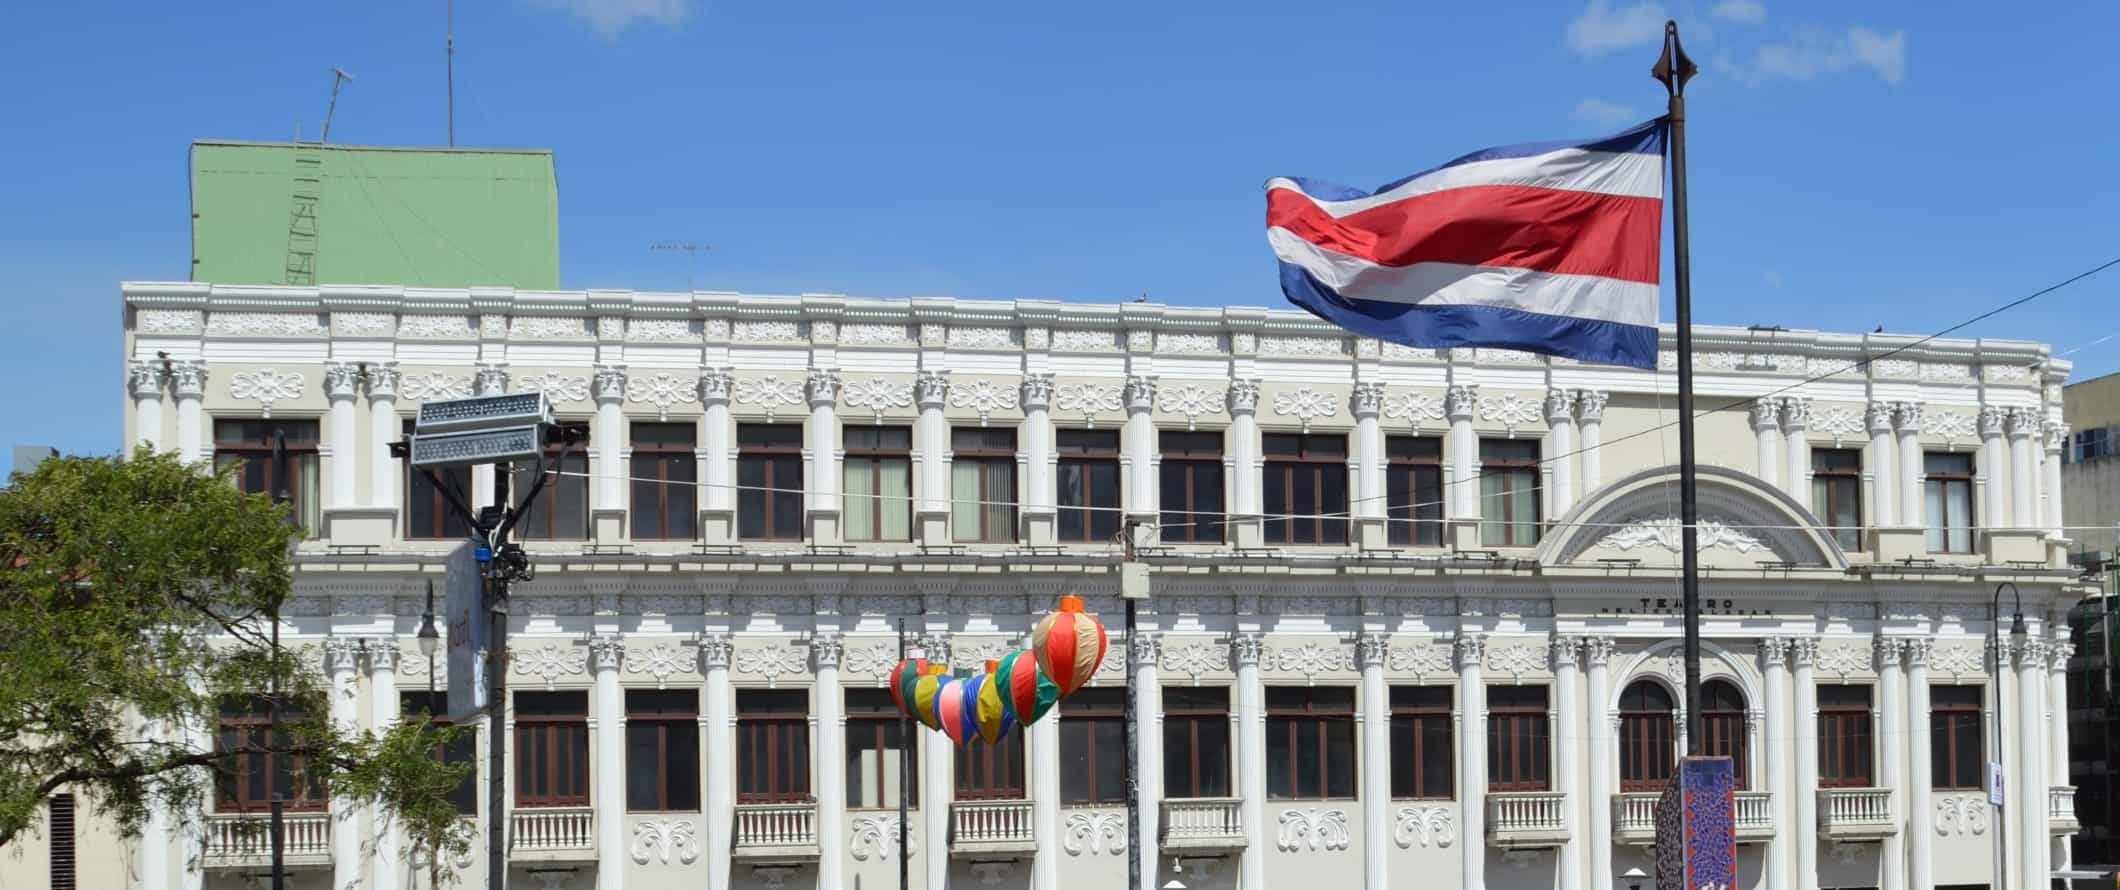 A historic building with the Costa Rican flag flying in front in San Jose, the capital of Costa Rica